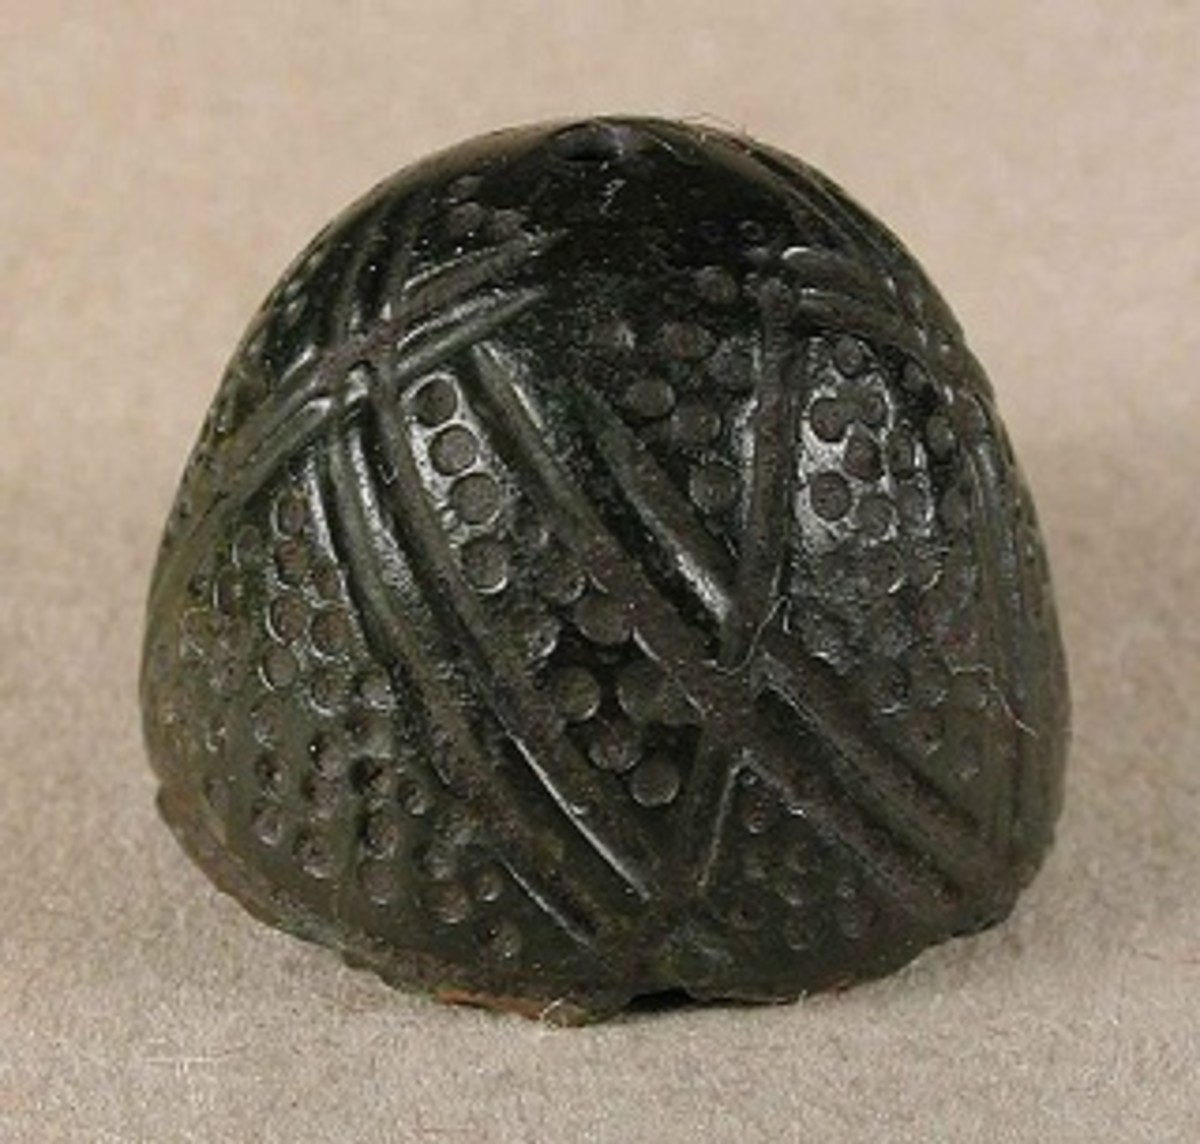 A European brass thimble dating from the 14th century